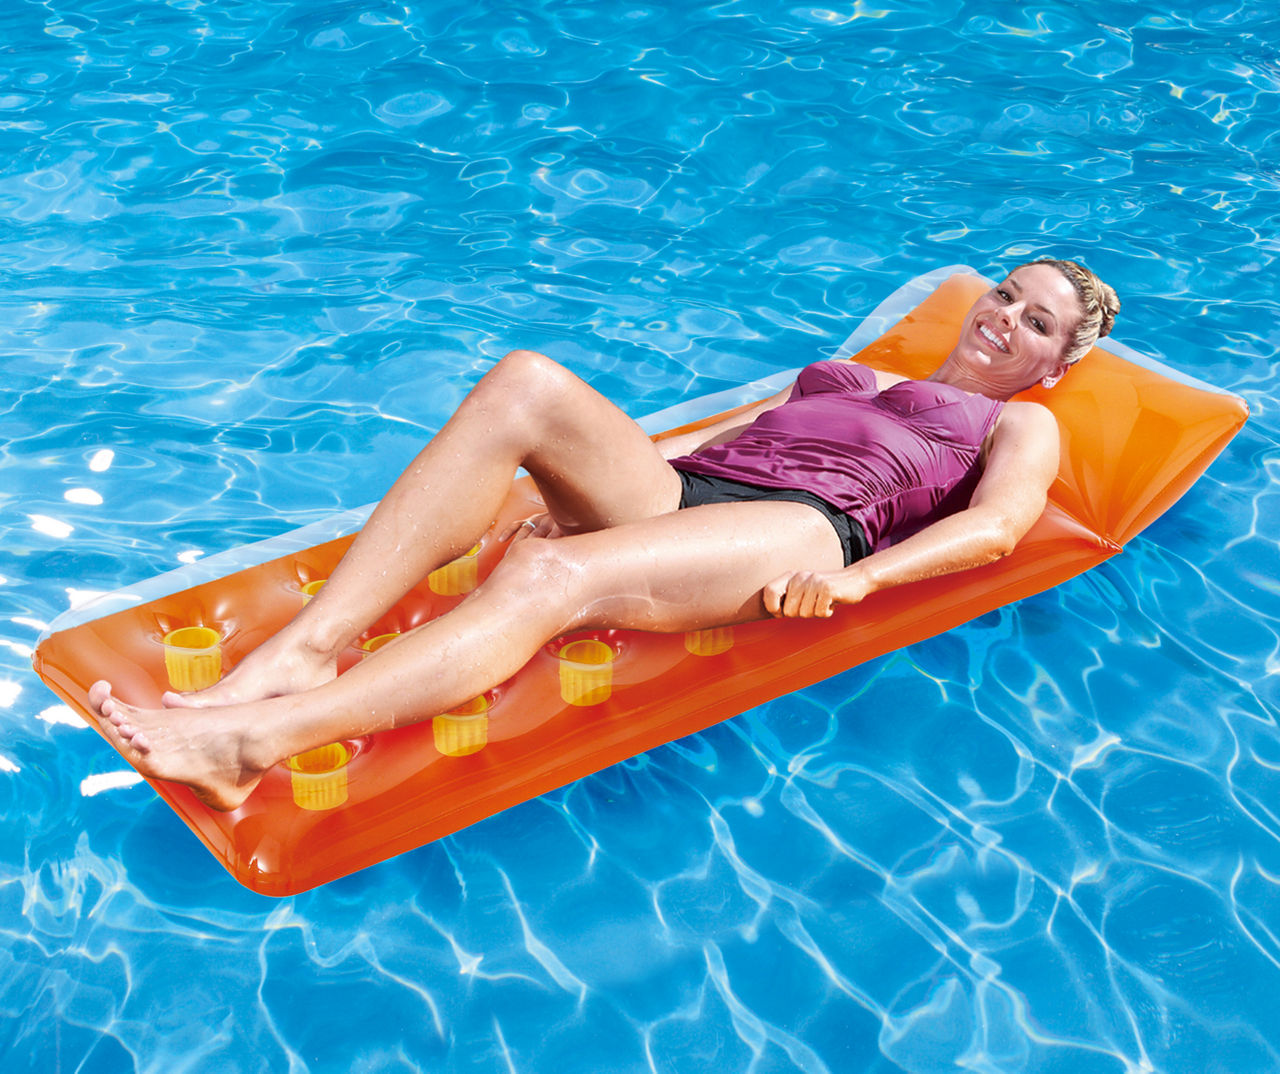 Details about   NEW Summer Waves 18-pocket lounge pool float 66in x 26inx10in  floating mattress 